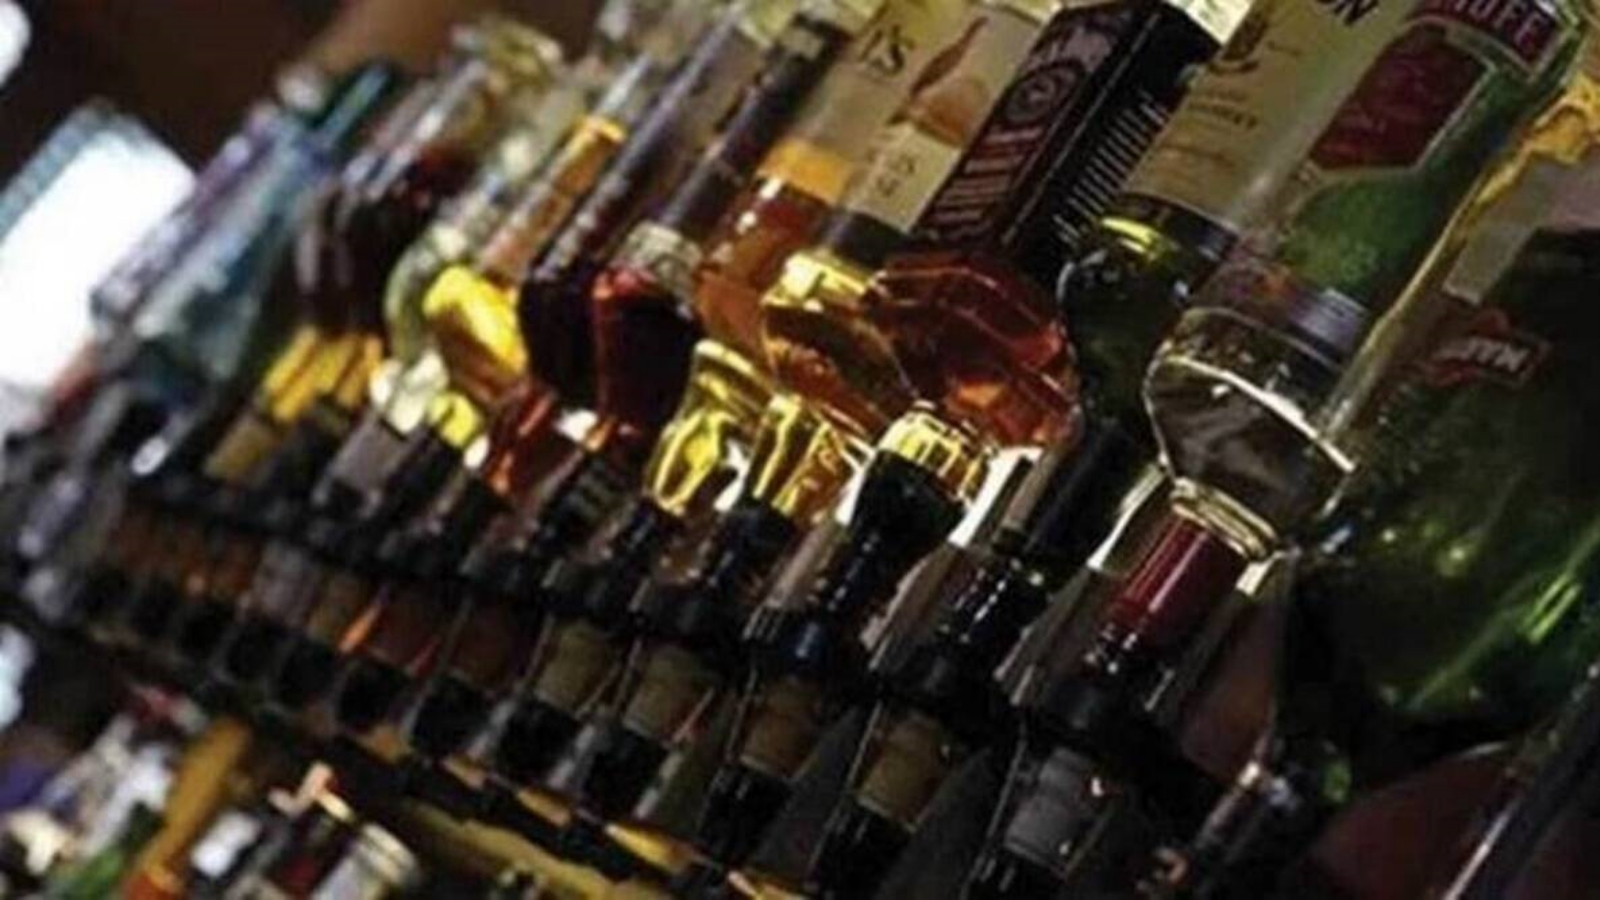 New excise policy: In grain alcohol push, govt aims at more revenue